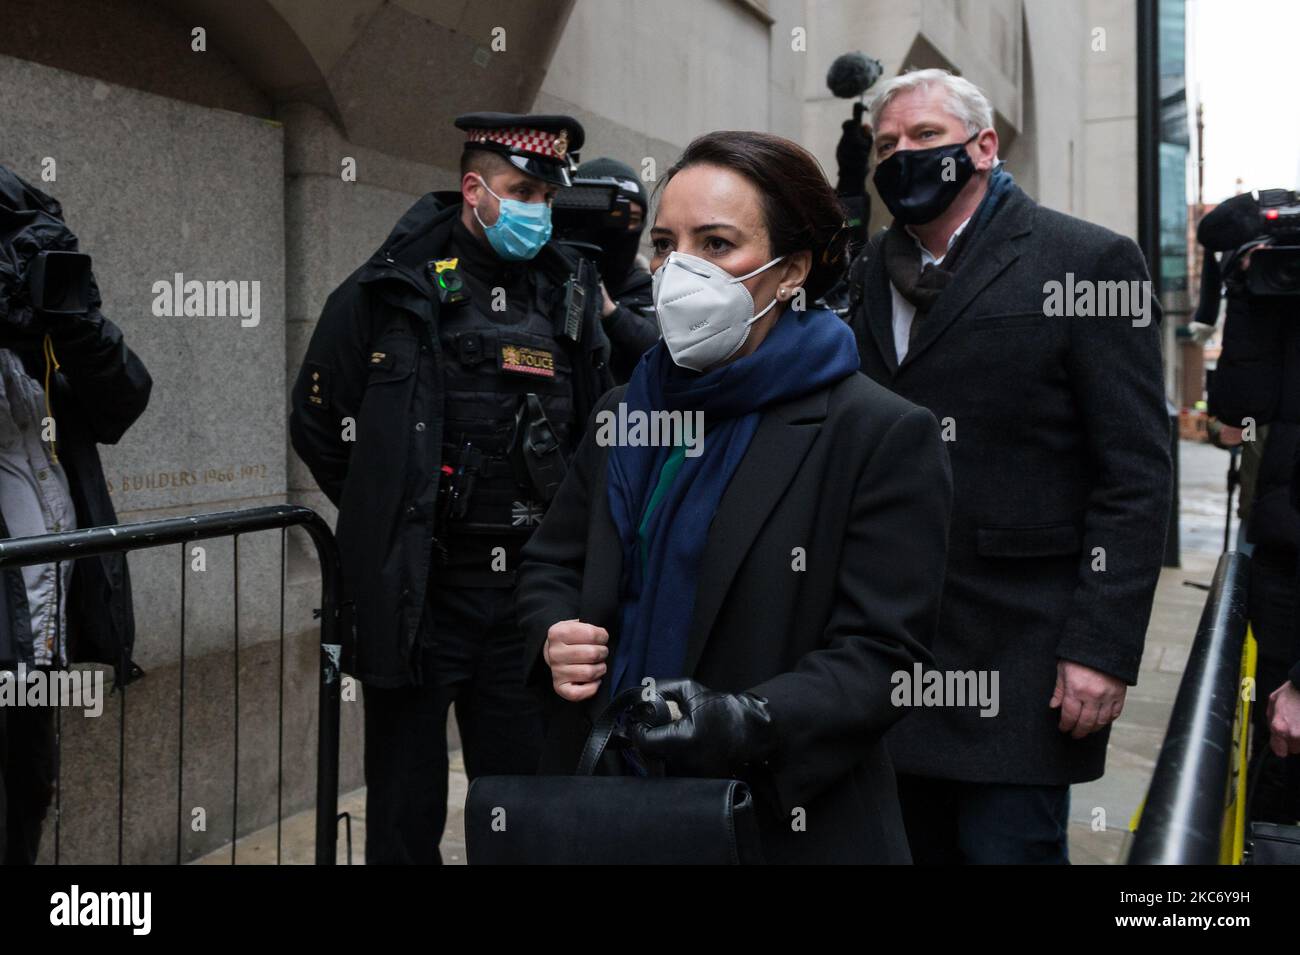 Stella Moris, Julian Assange’s partner, arrives at the Central Criminal Court (Old Bailey) as District Judge Vanessa Baraitser is set to deliver judgment on whether the founder of WikiLeaks should be extradited to the United States to face trial for espionage charges, on 04 January, 2021 in London, England. Julian Assange was indicted under the US Espionage Act of 1917 on 17 counts for soliciting, gathering and publishing secret US military documents including logs on the wars in Afghanistan and Iraq, and diplomatic cables, provided by Chelsea Manning. (Photo by WIktor Szymanowicz/NurPhoto) Stock Photo